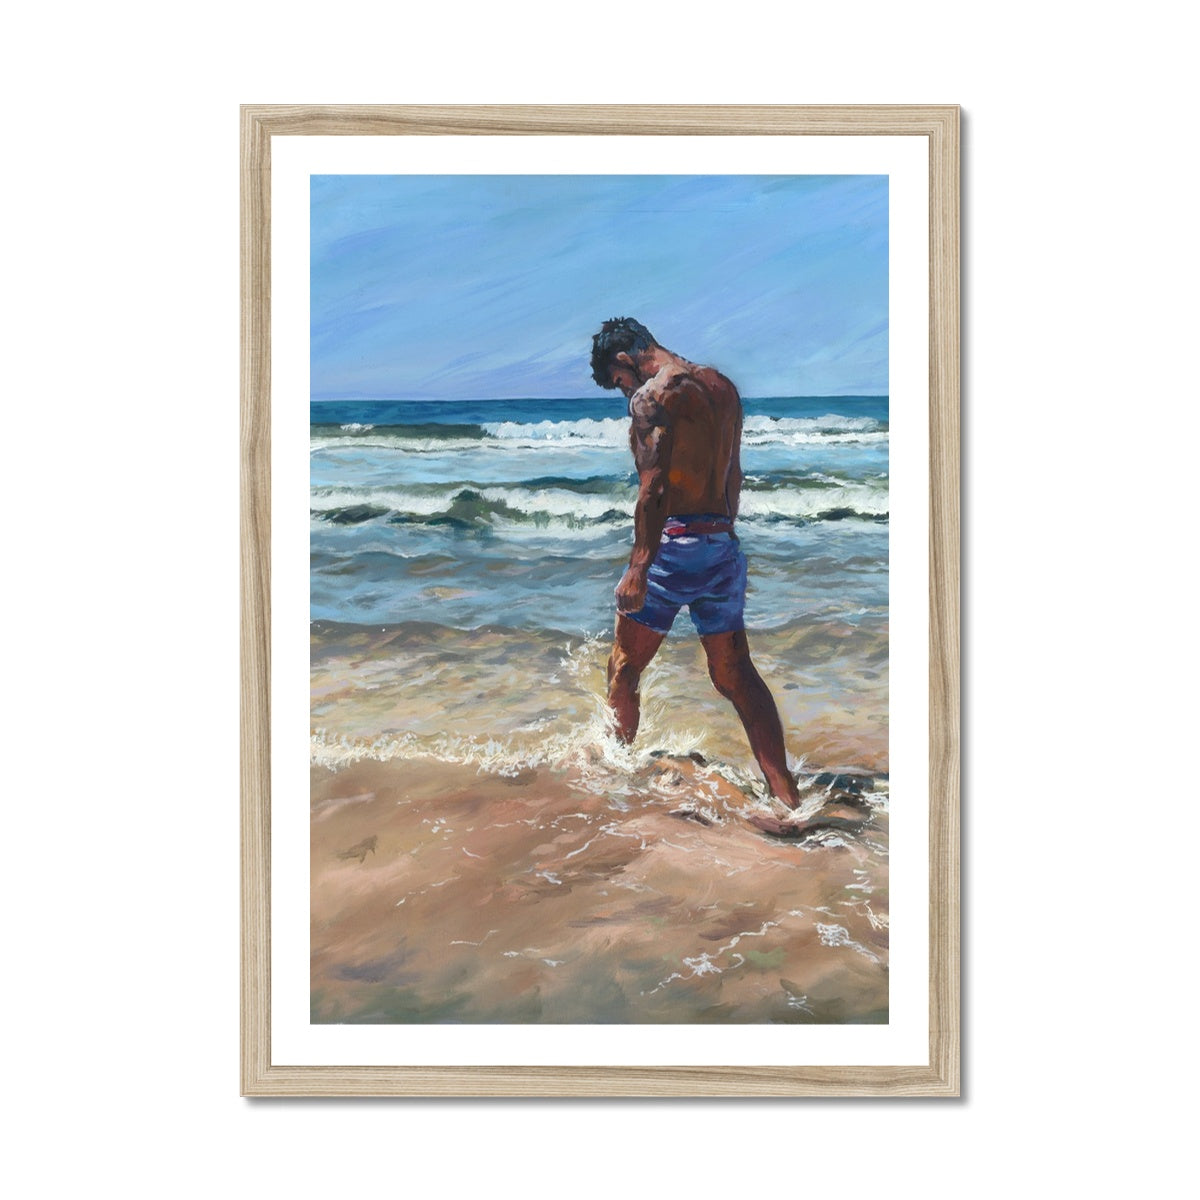 Cornwall stays firmly in your memory with this Fine Art Print of a surfer dude - lorrainefield